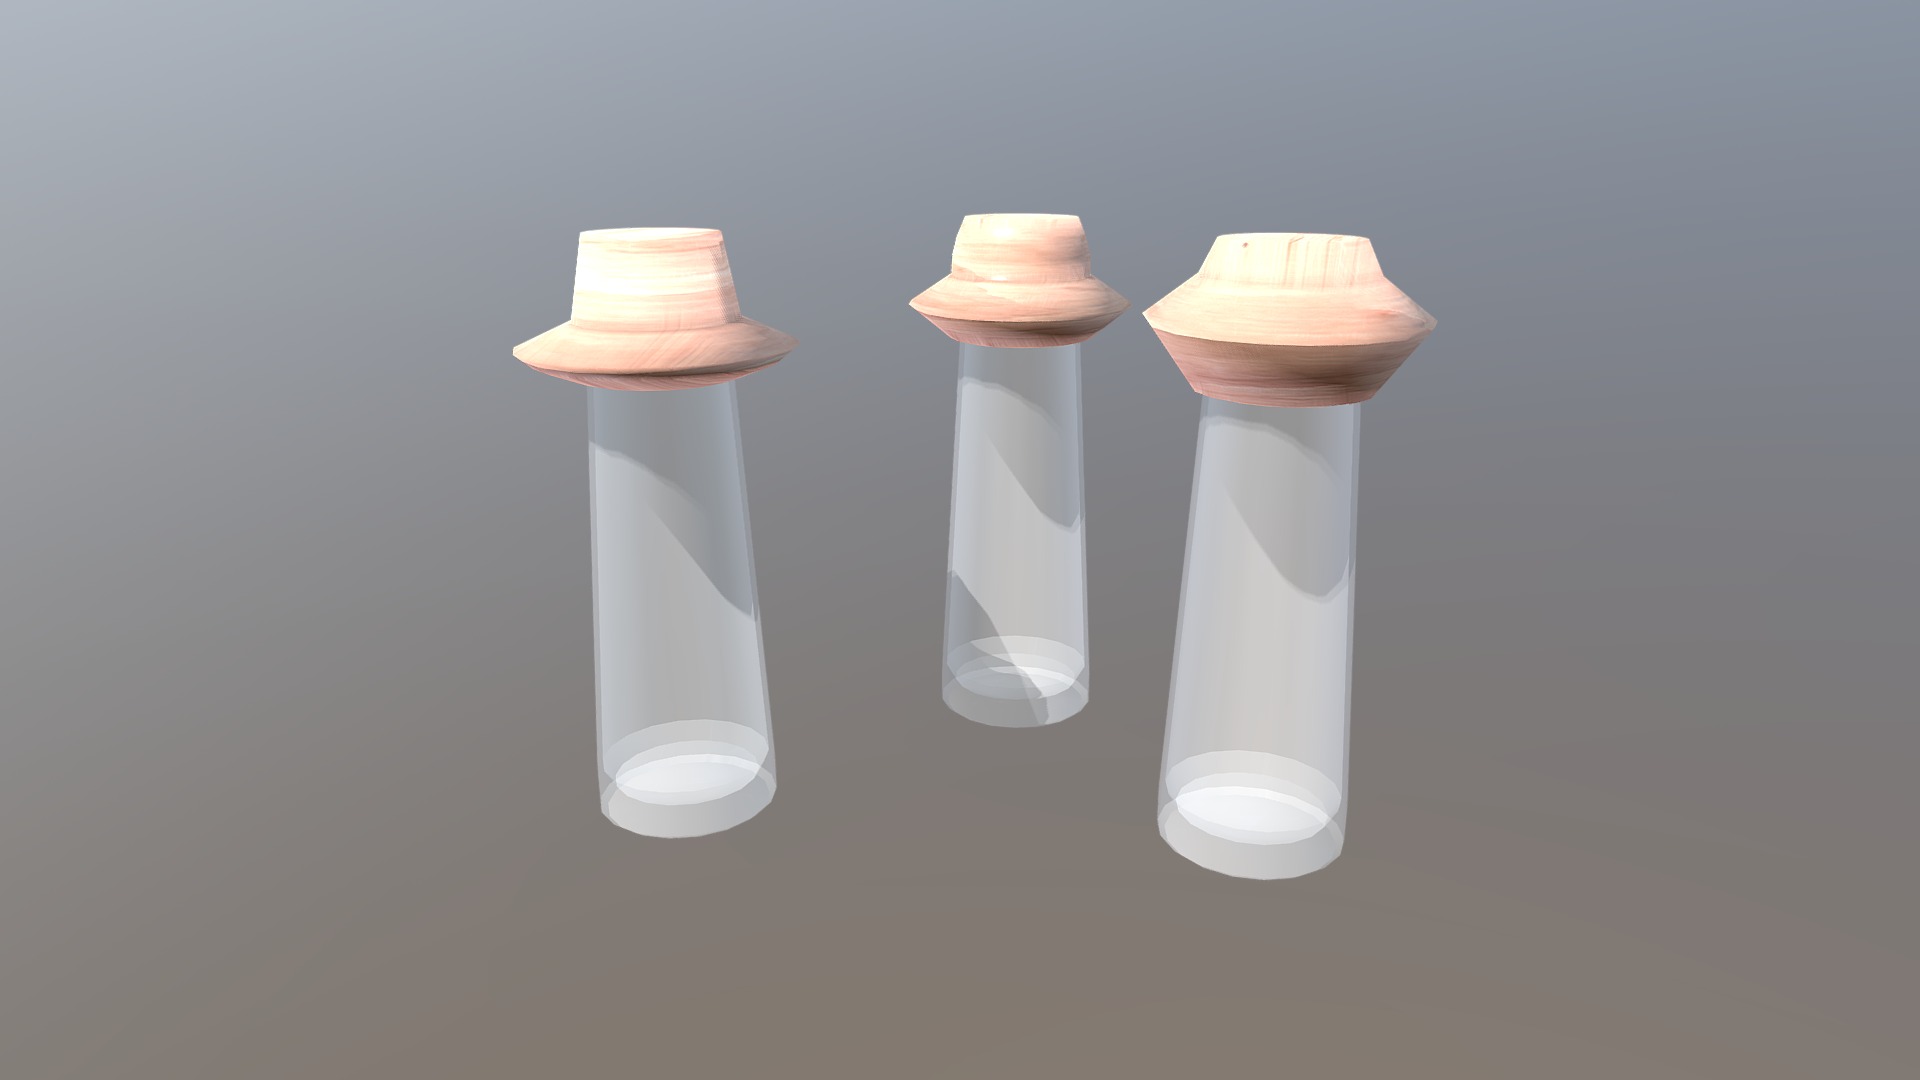 3D model Salt and Pepper Glass Shaker - This is a 3D model of the Salt and Pepper Glass Shaker. The 3D model is about a group of white and orange cylindrical objects.